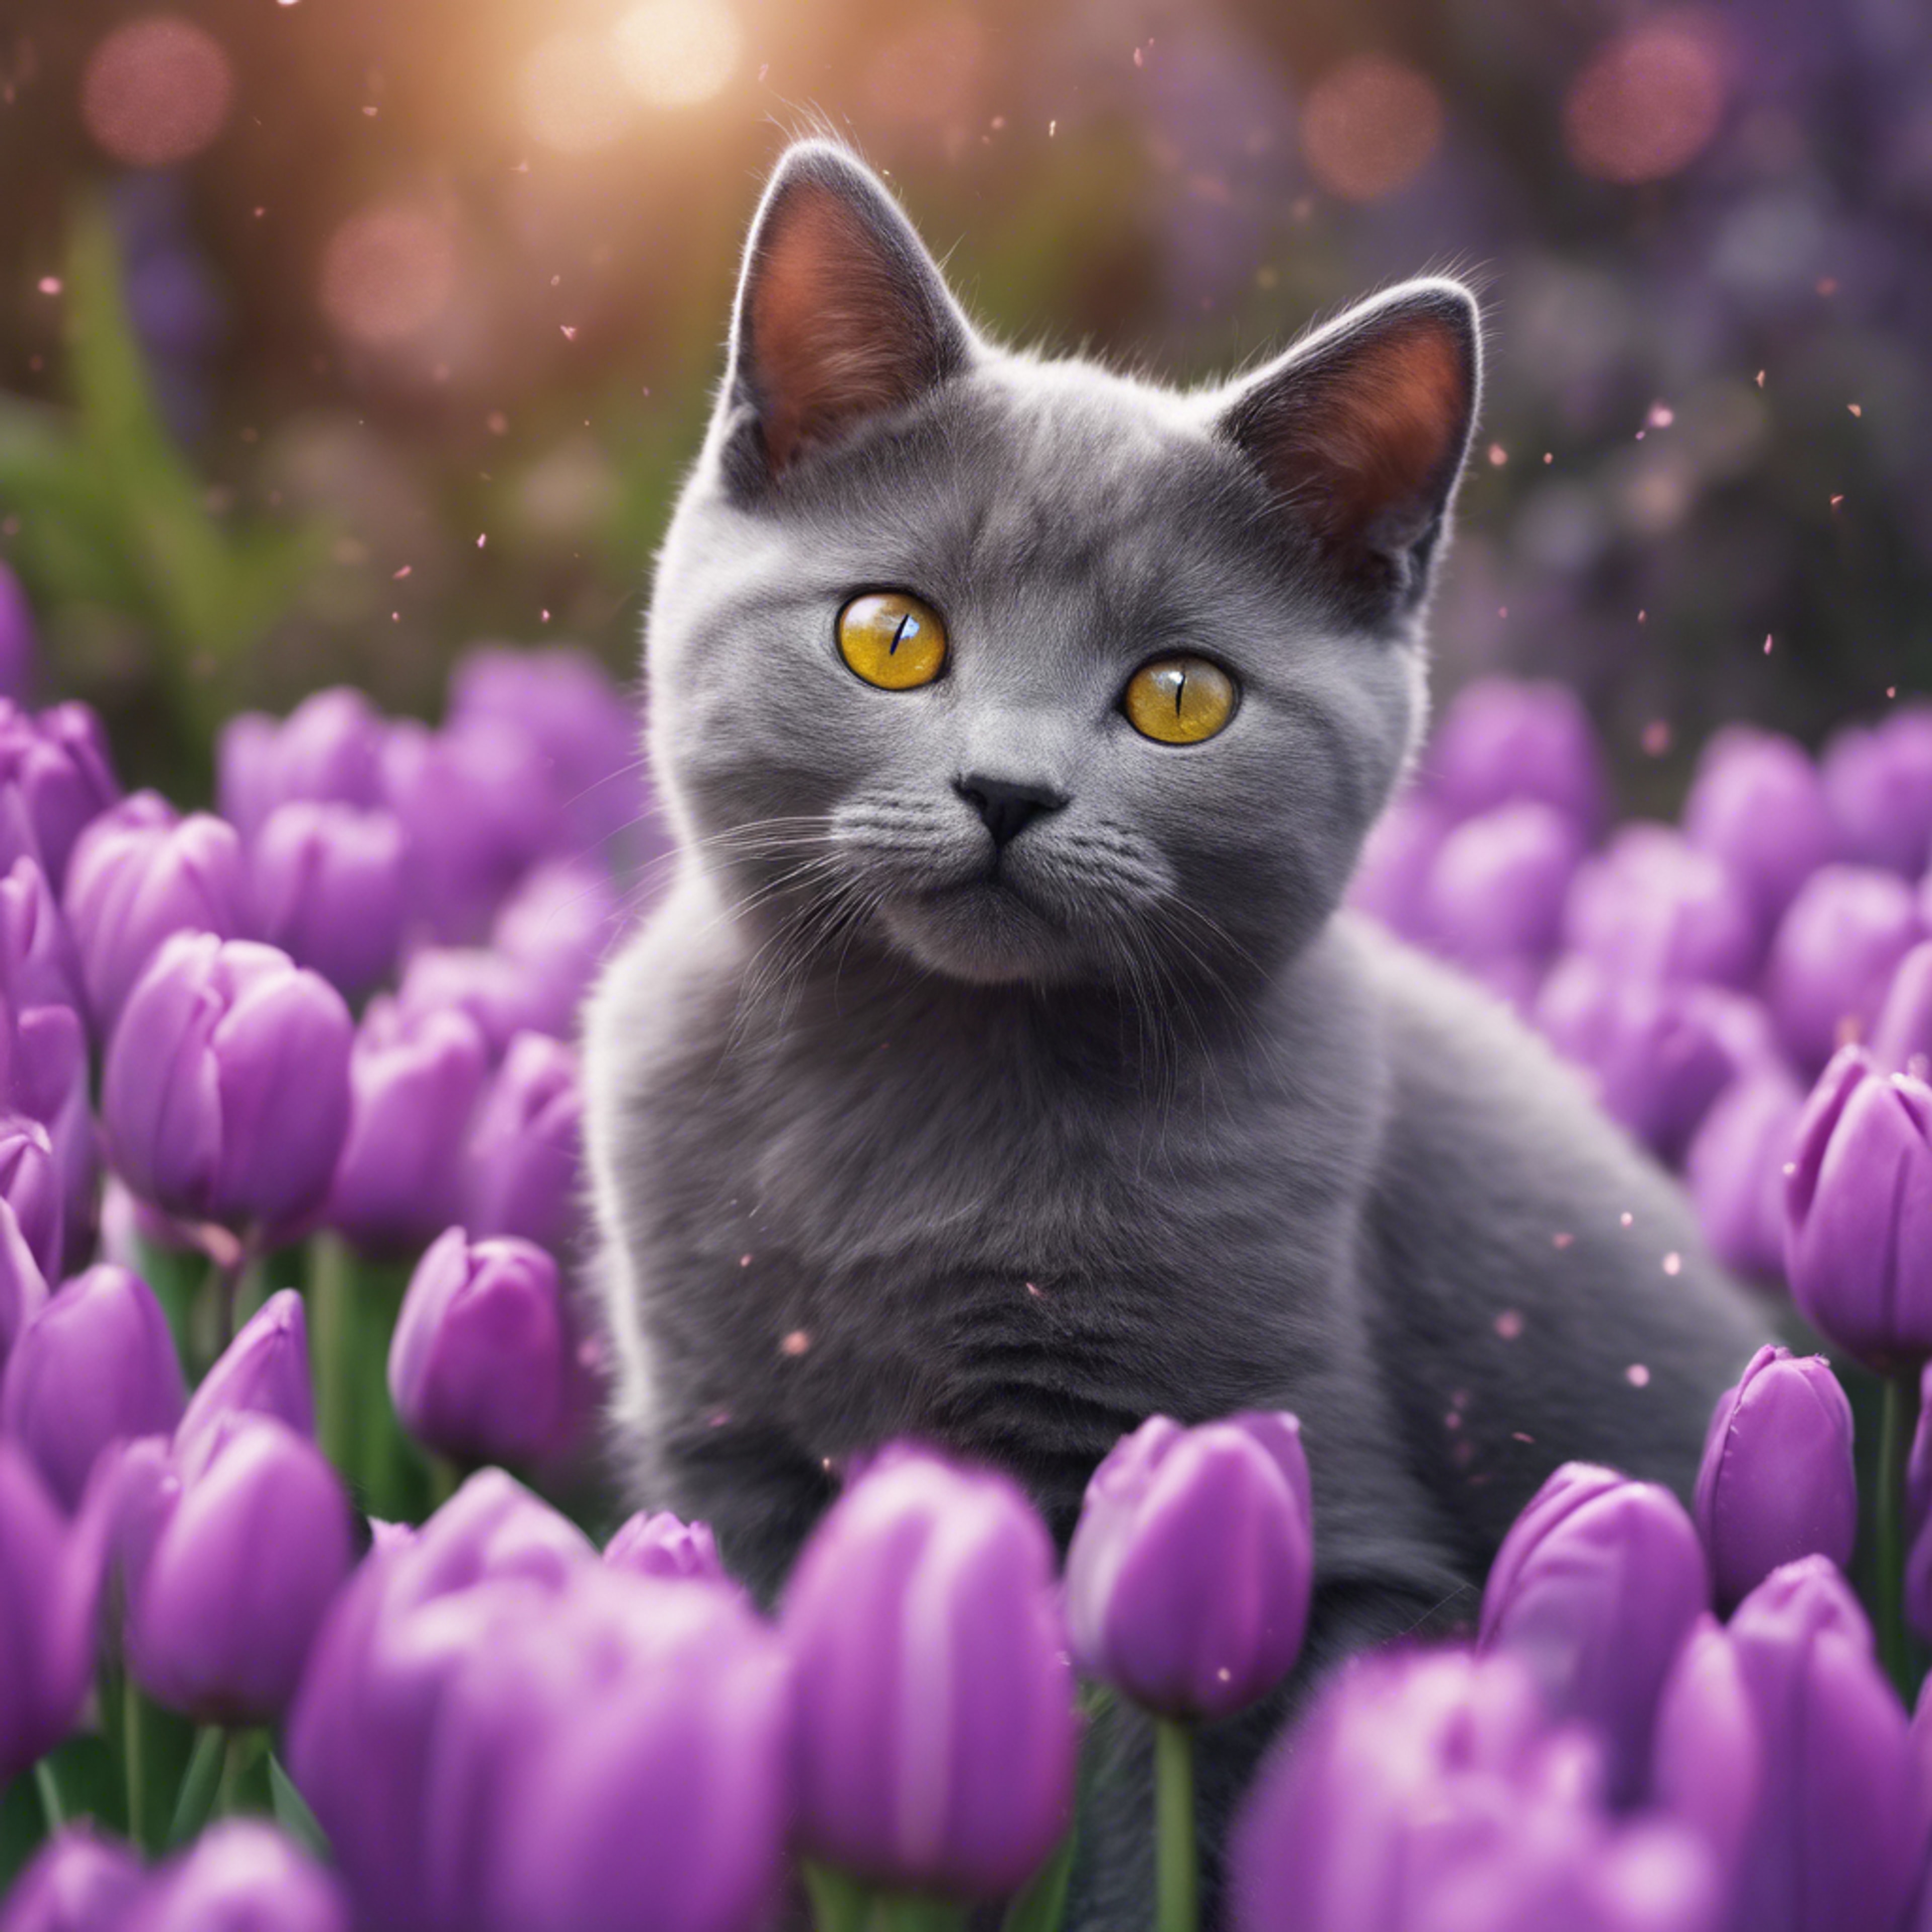 A Chartreux kitten with gleaming copper eyes, nestled in a bed of purple tulips deep in an enchanted forest.壁紙[af50129bbe5f426097a8]